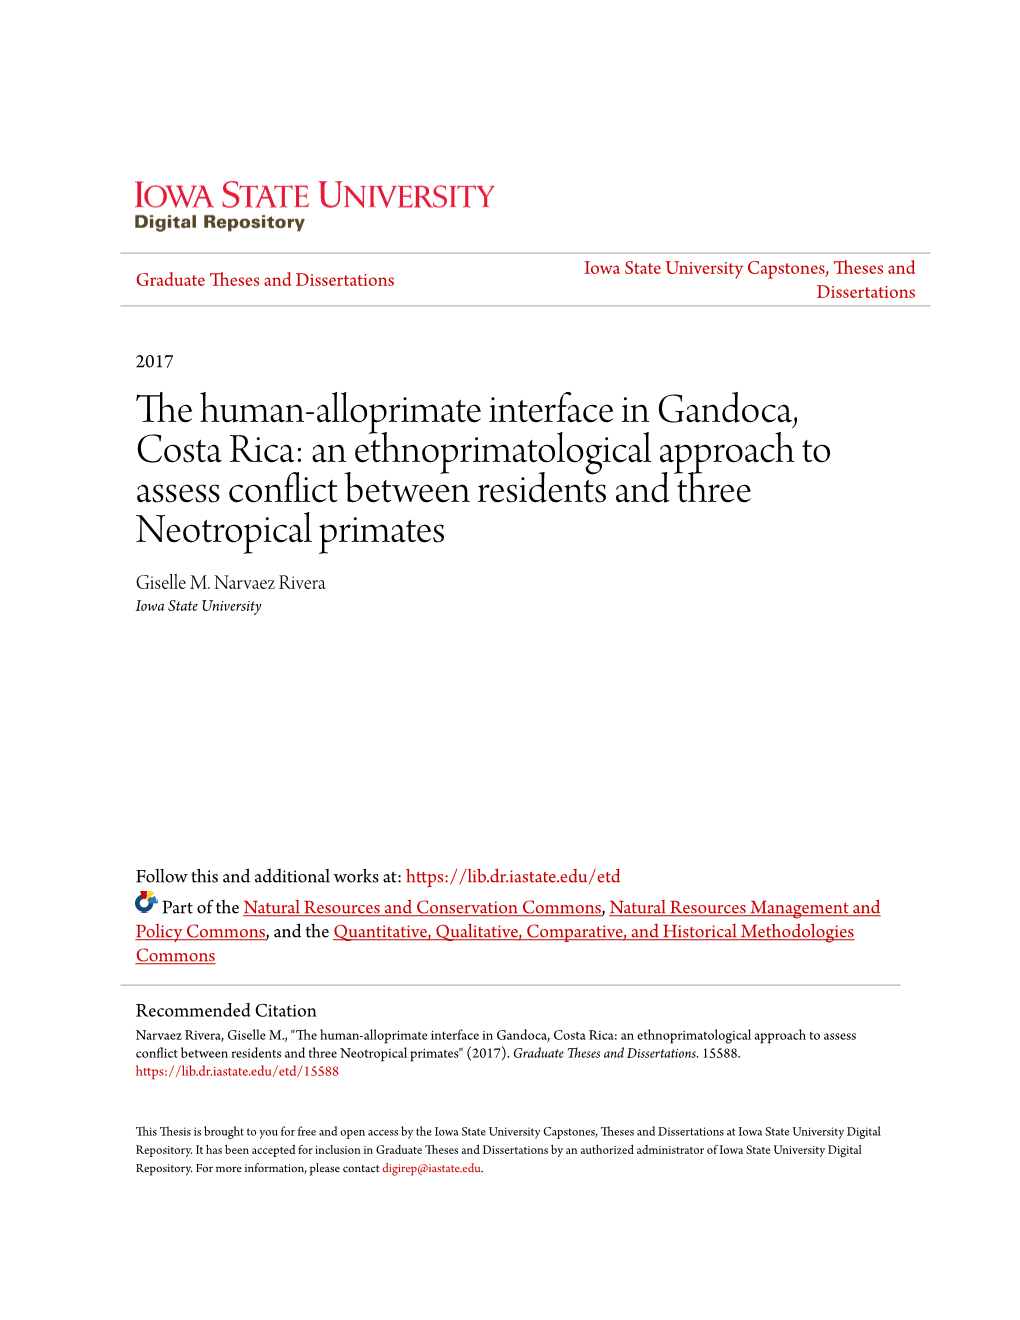 The Human-Alloprimate Interface in Gandoca, Costa Rica: an Ethnoprimatological Approach to Assess Conflict Between Residents and Three Neotropical Primates